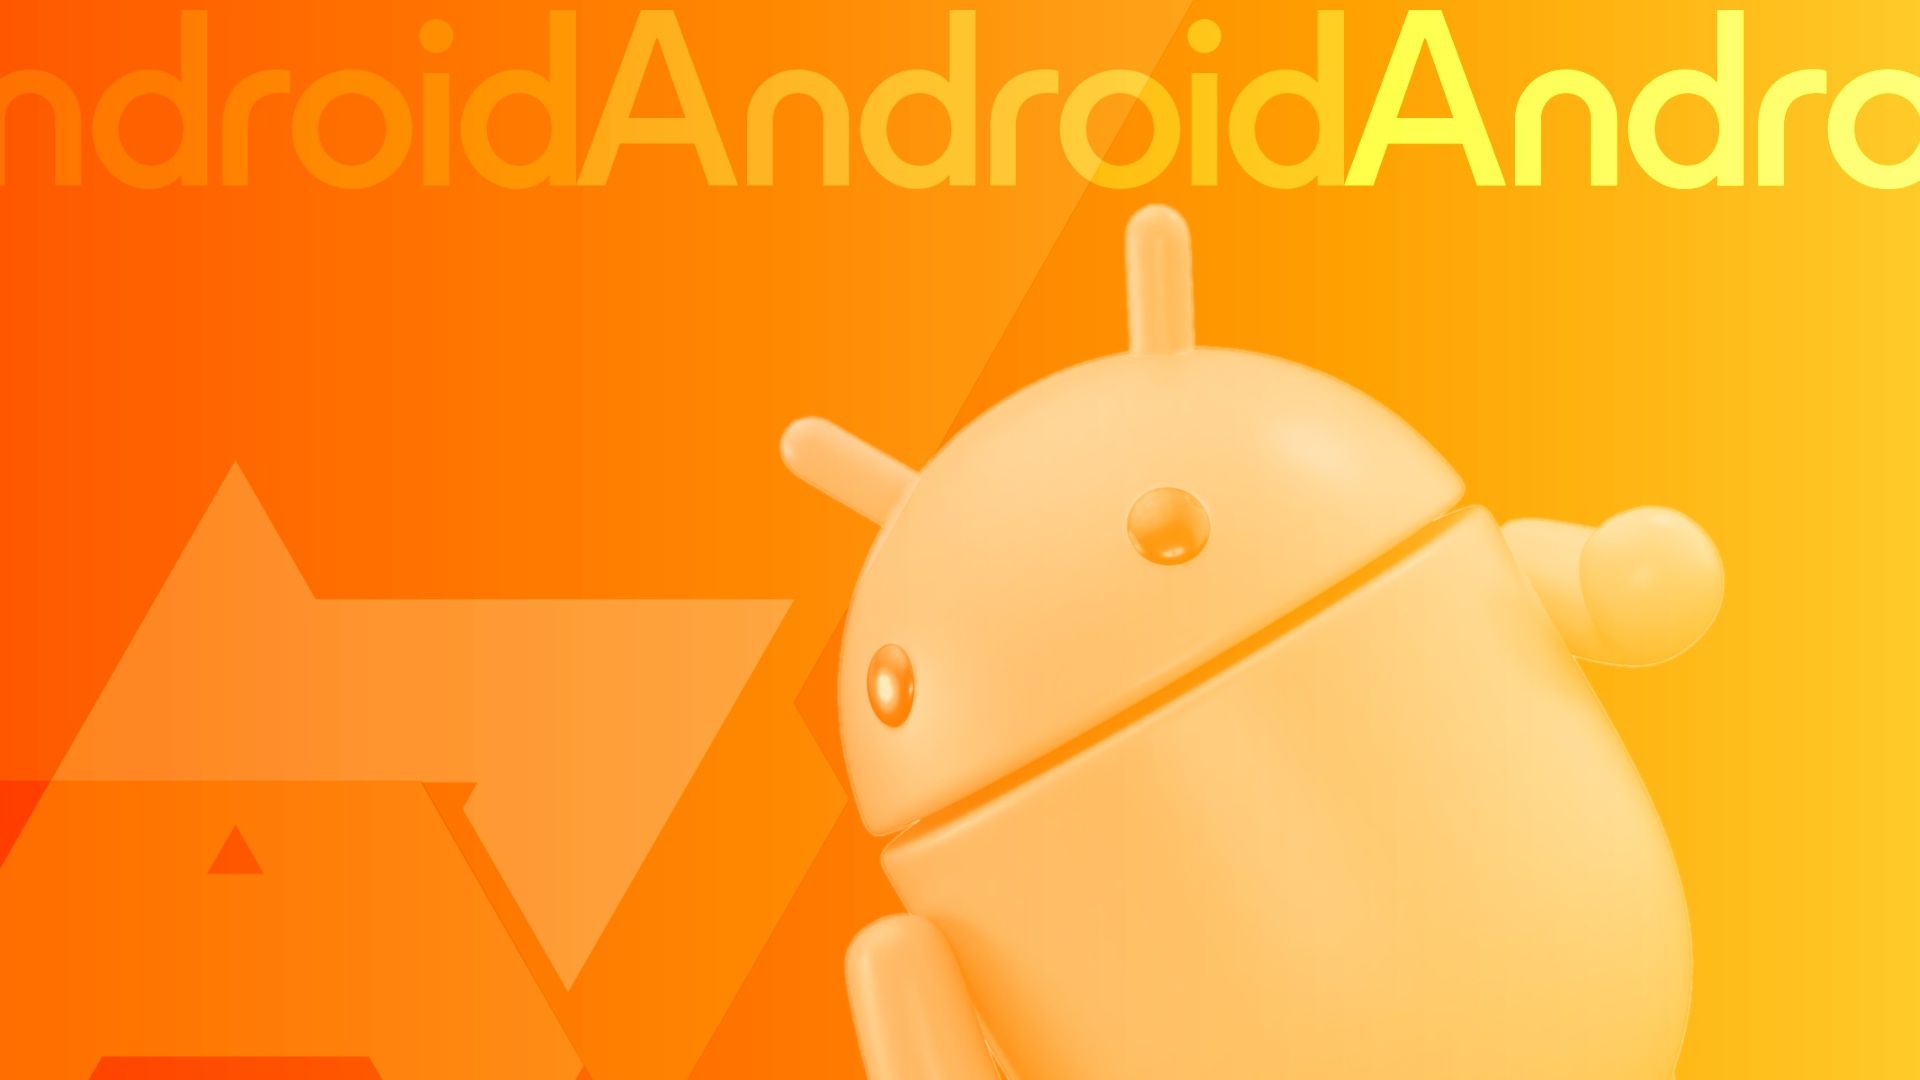 The Android bugdroid in an orange shade